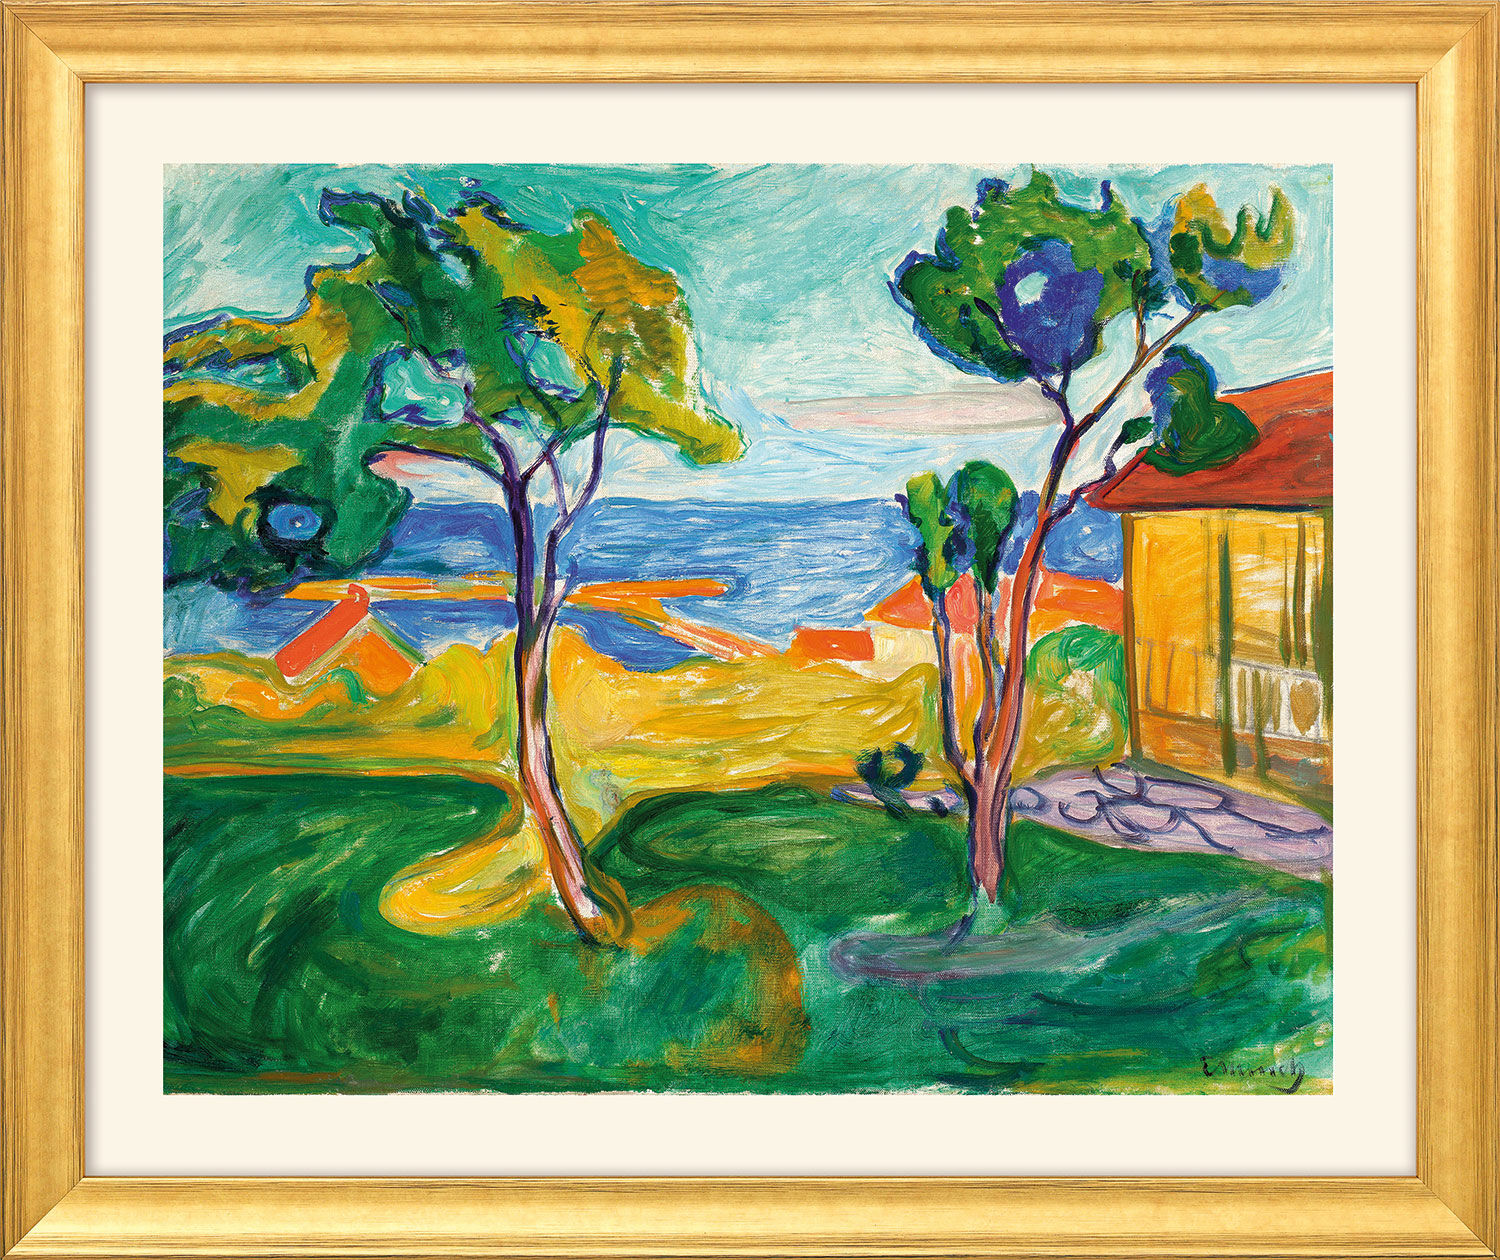 Picture "The Garden in Asgardstrand" (1904-05) - from "Seasons Cycle", golden framed version by Edvard Munch